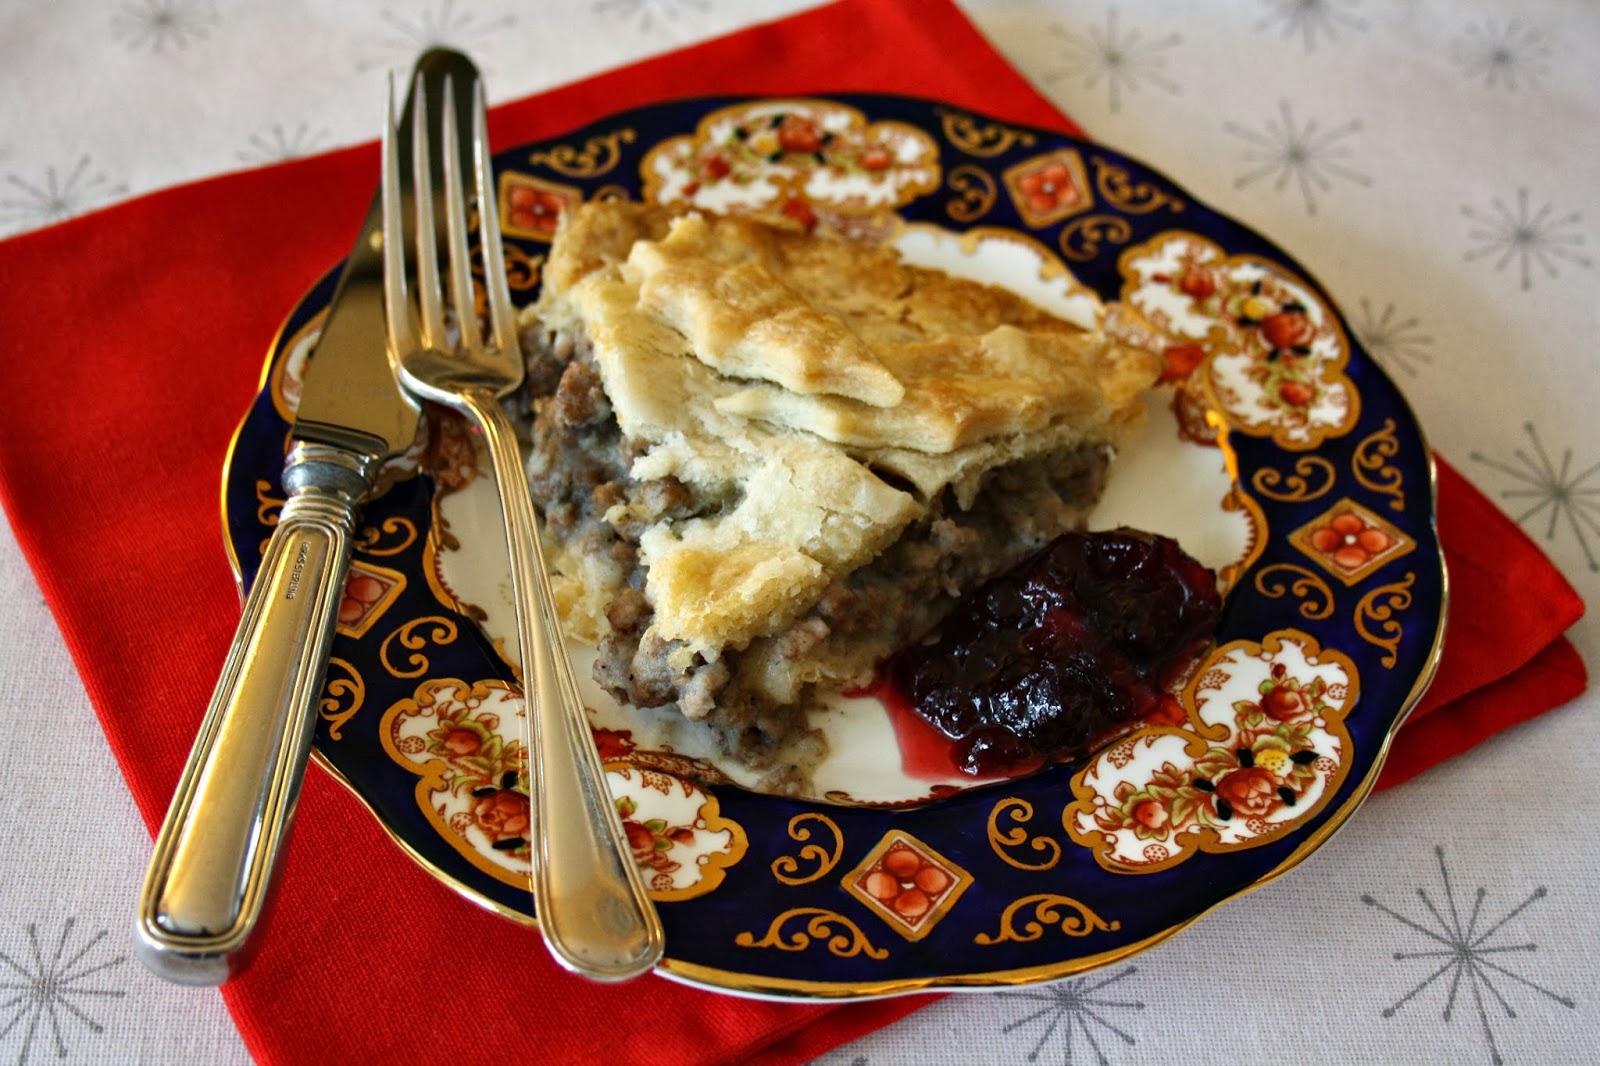 Traditional tourtiere recipe - a lightly seasoned meat pie